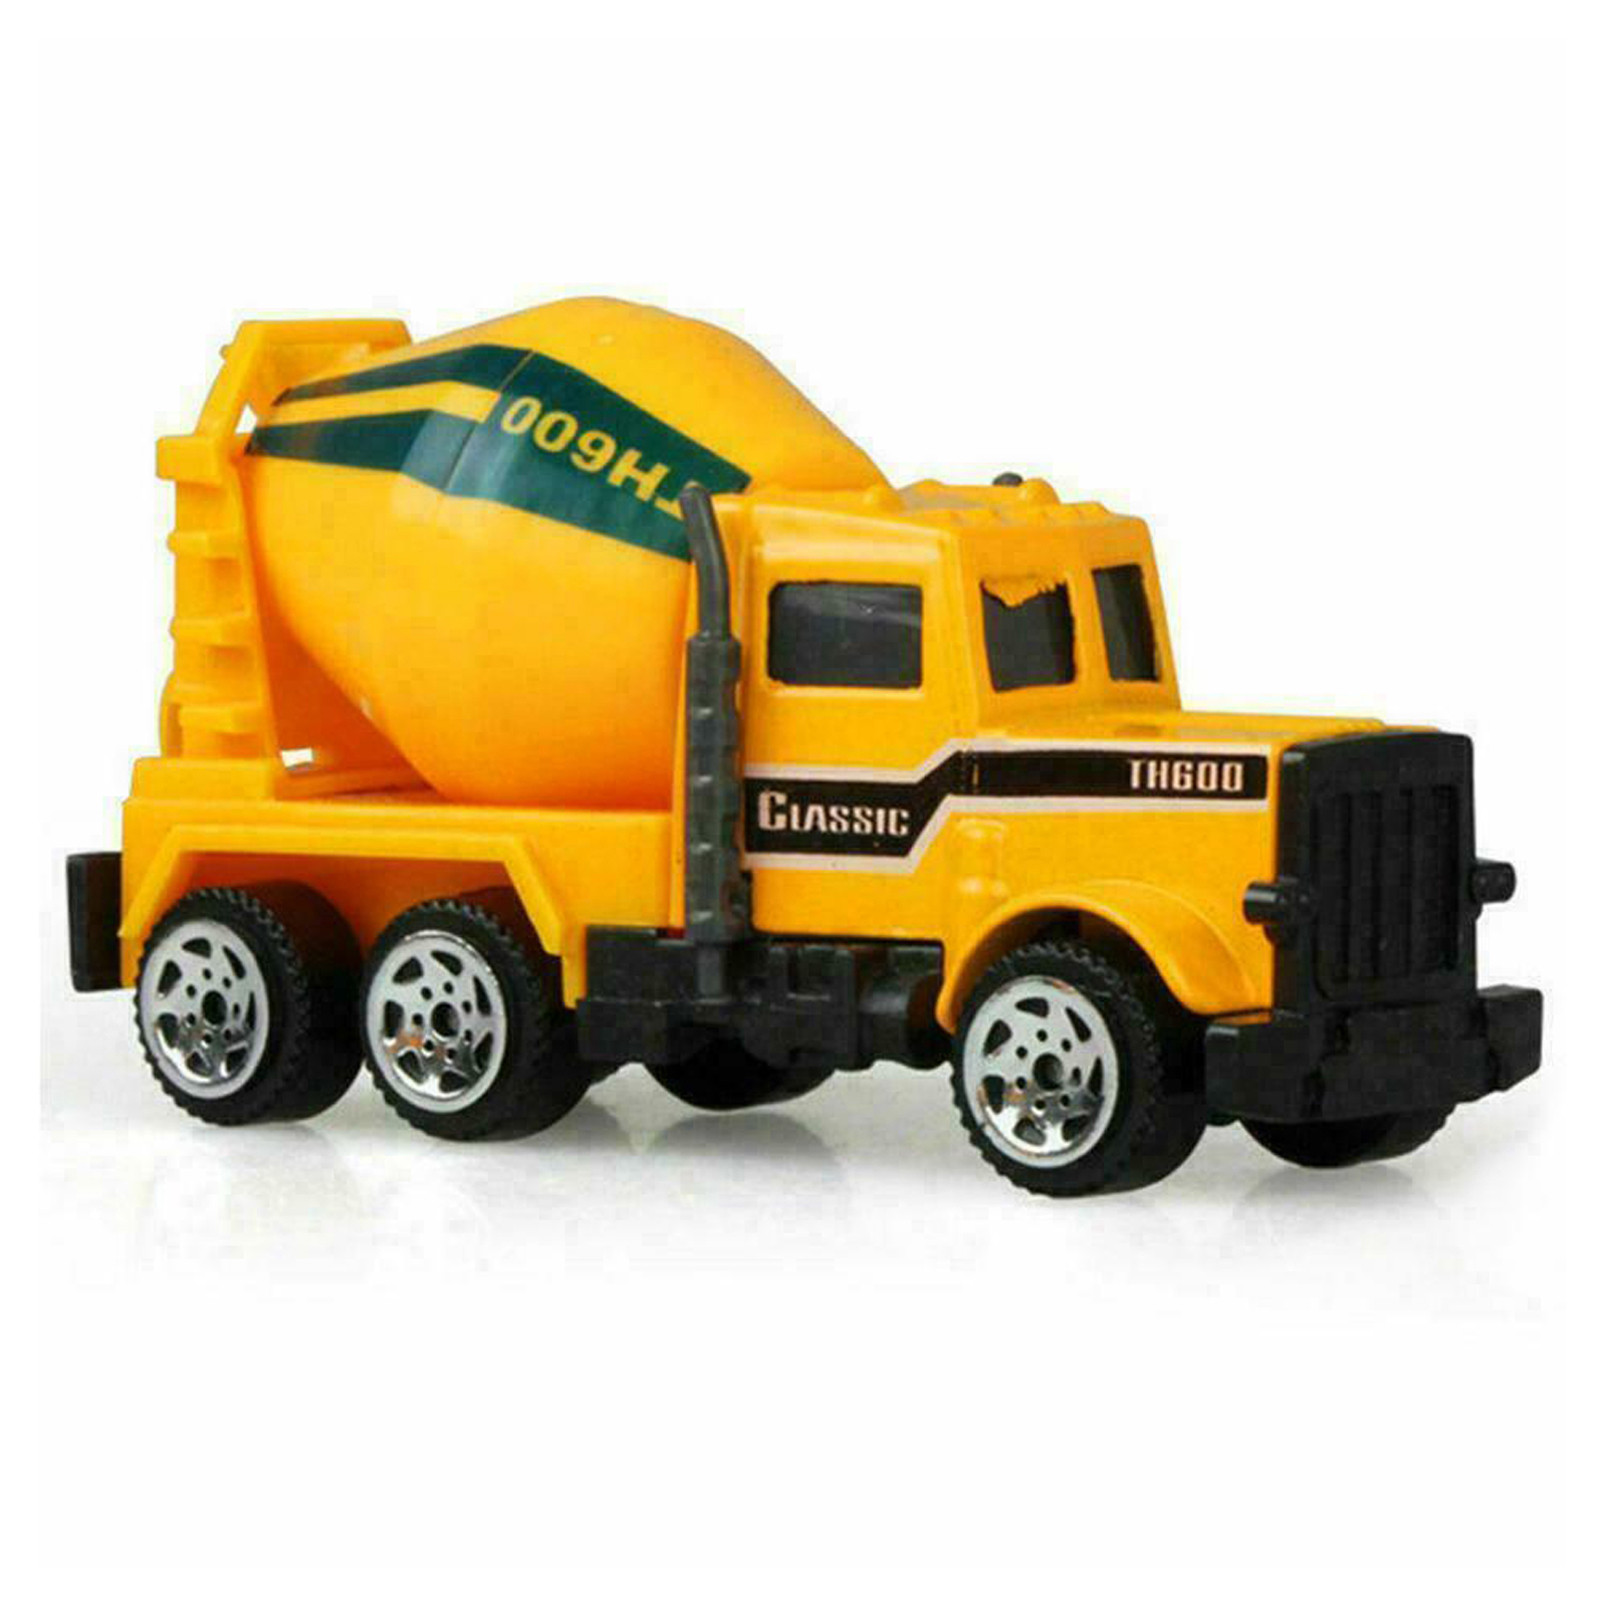 VANLOFE Car Toys For Boys Aged 2 3 4+ Gift 6 PC Diecast Mini Alloy Inertial Engineering Vehicle Dump Truck Educational Toys - image 3 of 8